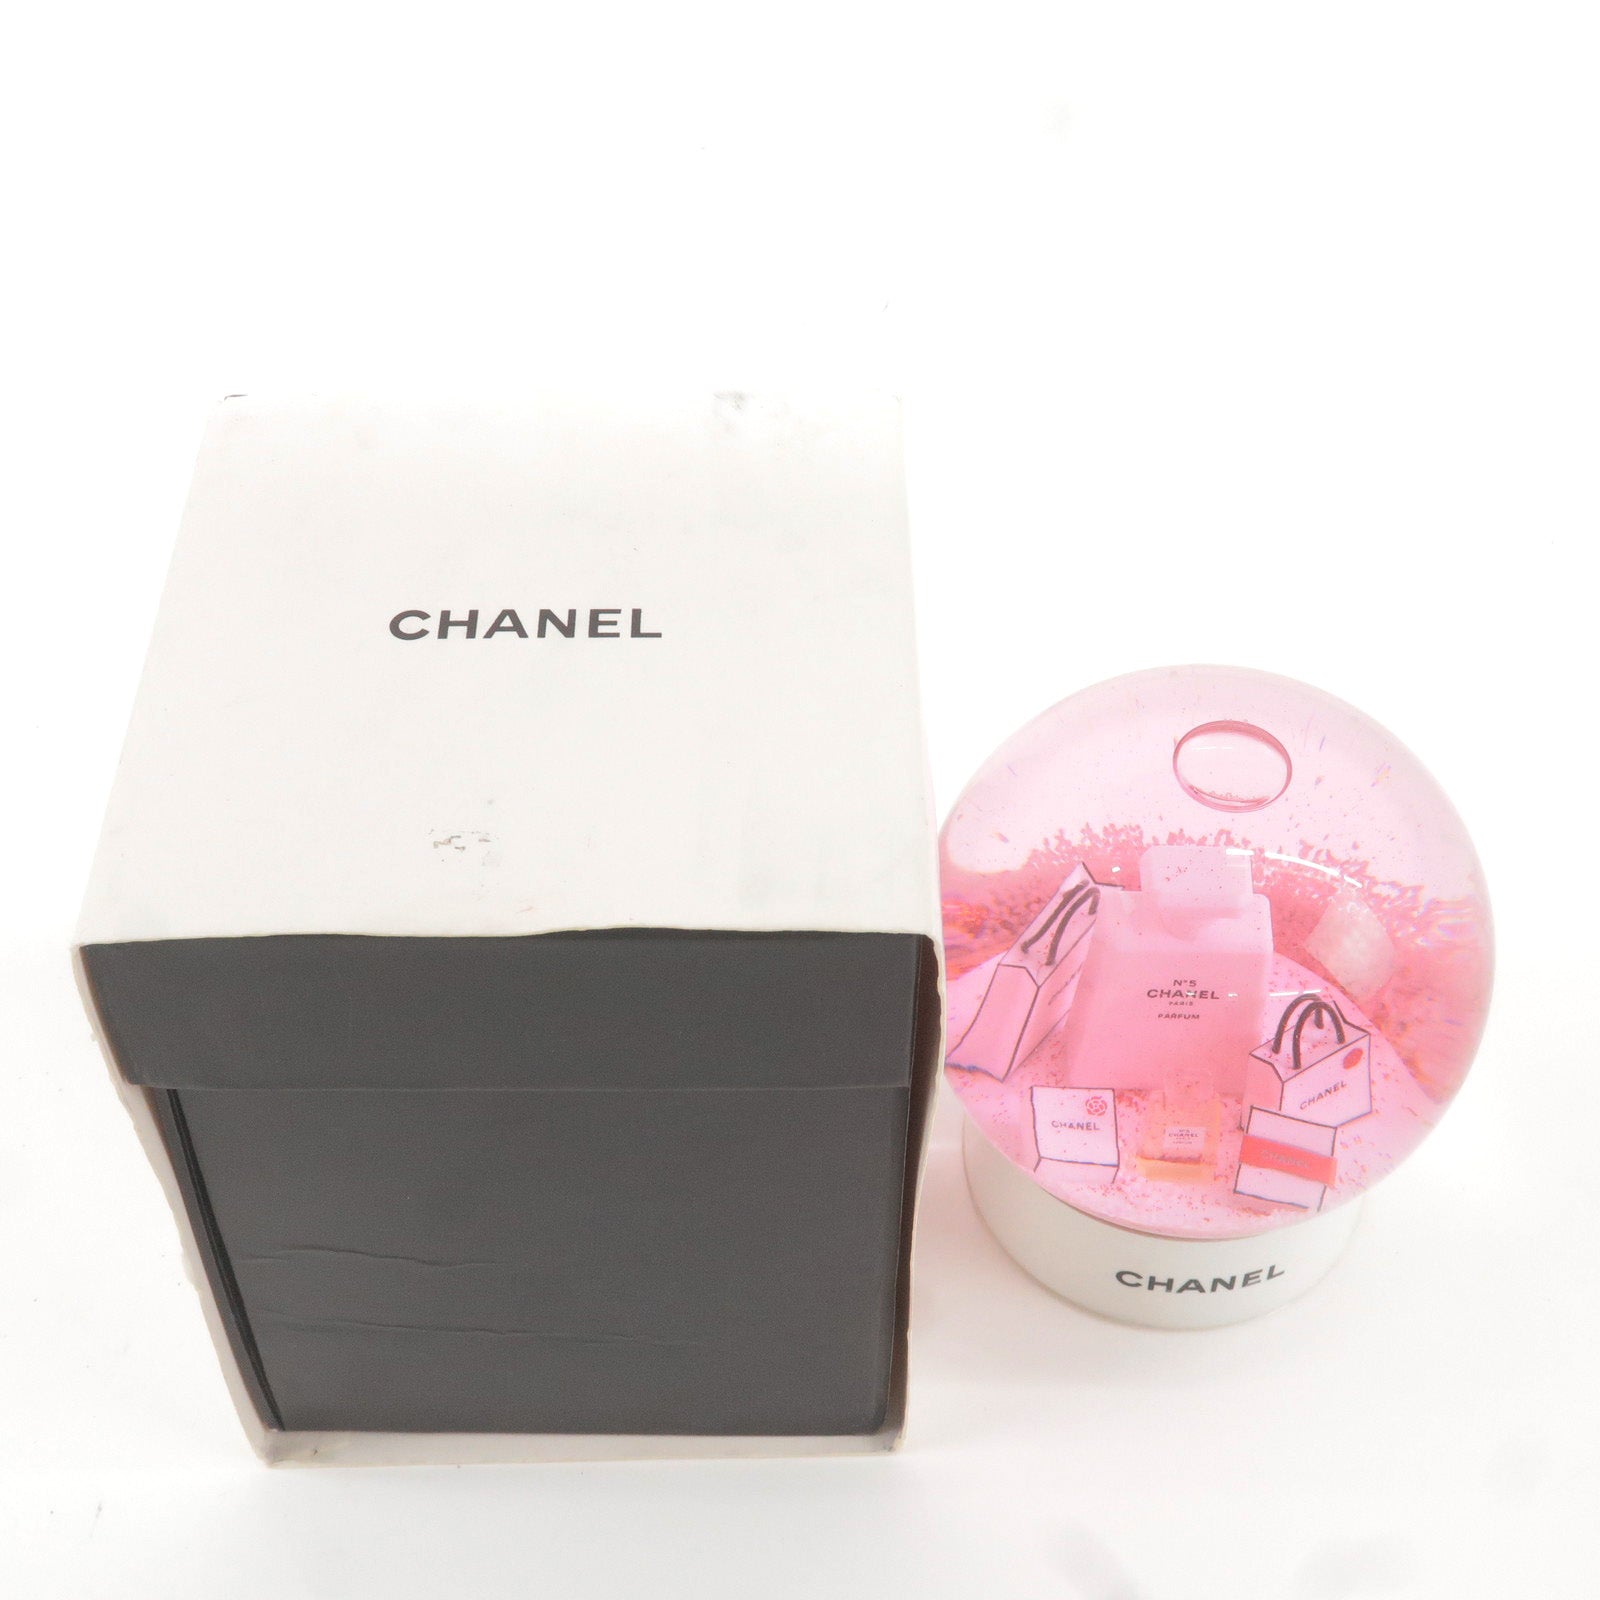 CHANEL-Snow-Globe-Glass-2016-CHANEL-Novelty-Pink-White – dct-ep_vintage  luxury Store